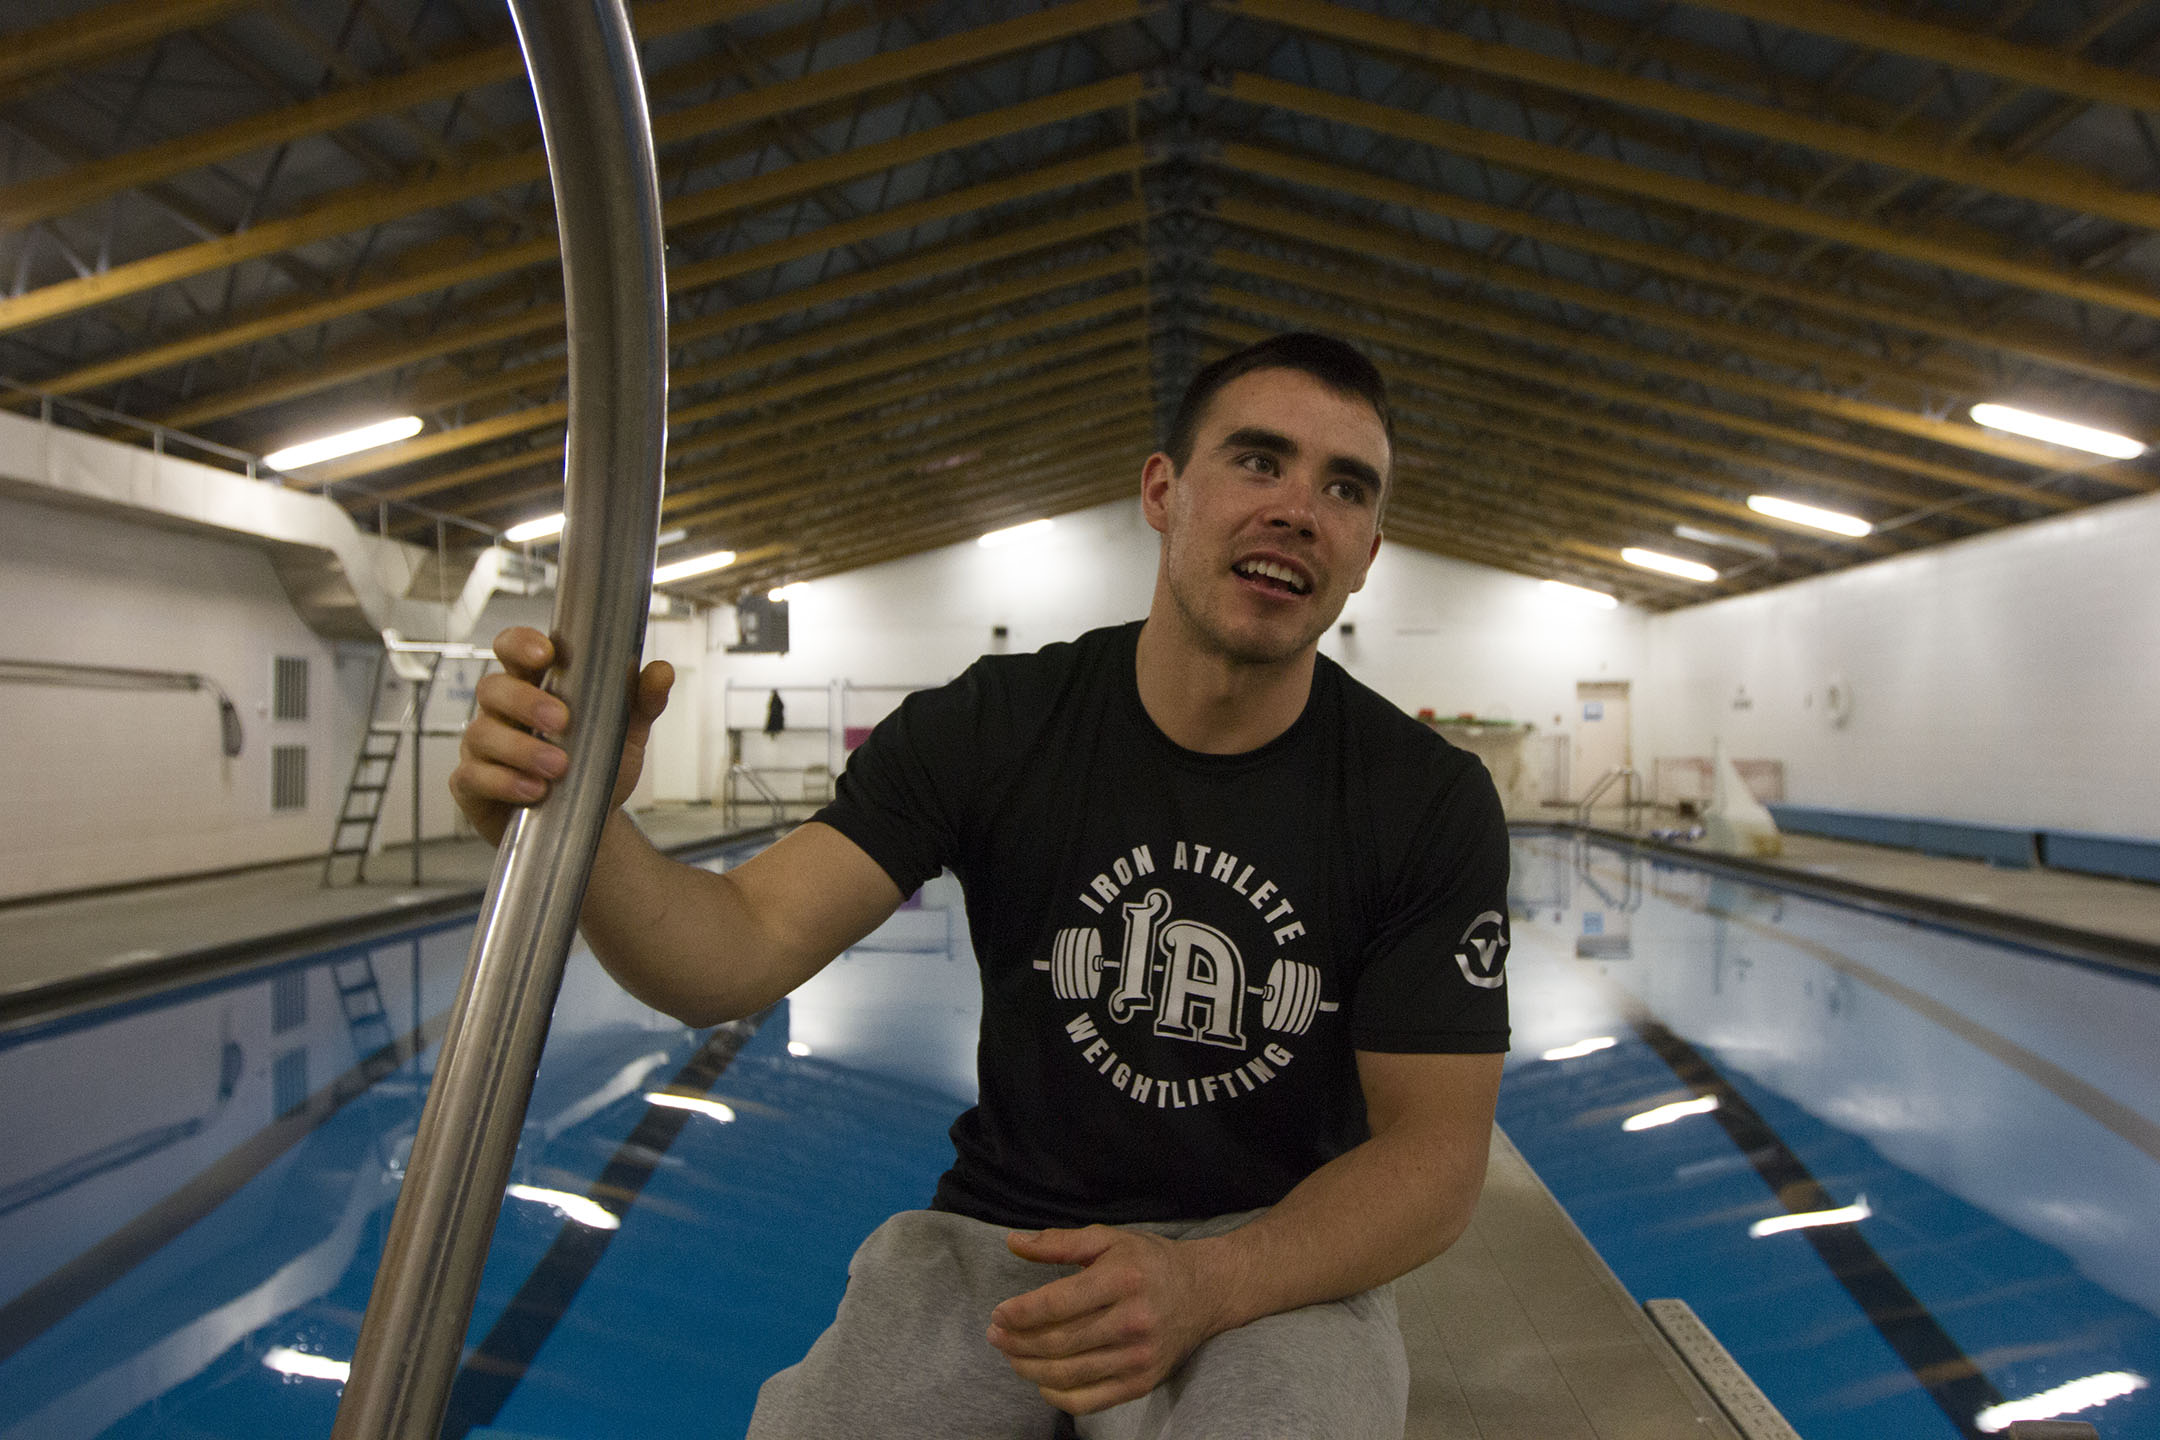 Miles Werk, the recreational fitness and wellness coordinator at the Red Whip Gym, teaches fitness classes and helps manage the gym. Since he started working at the gym in 2012, the gym has improved its services by renovating the pool, basketball court and upgrading gym equipment.